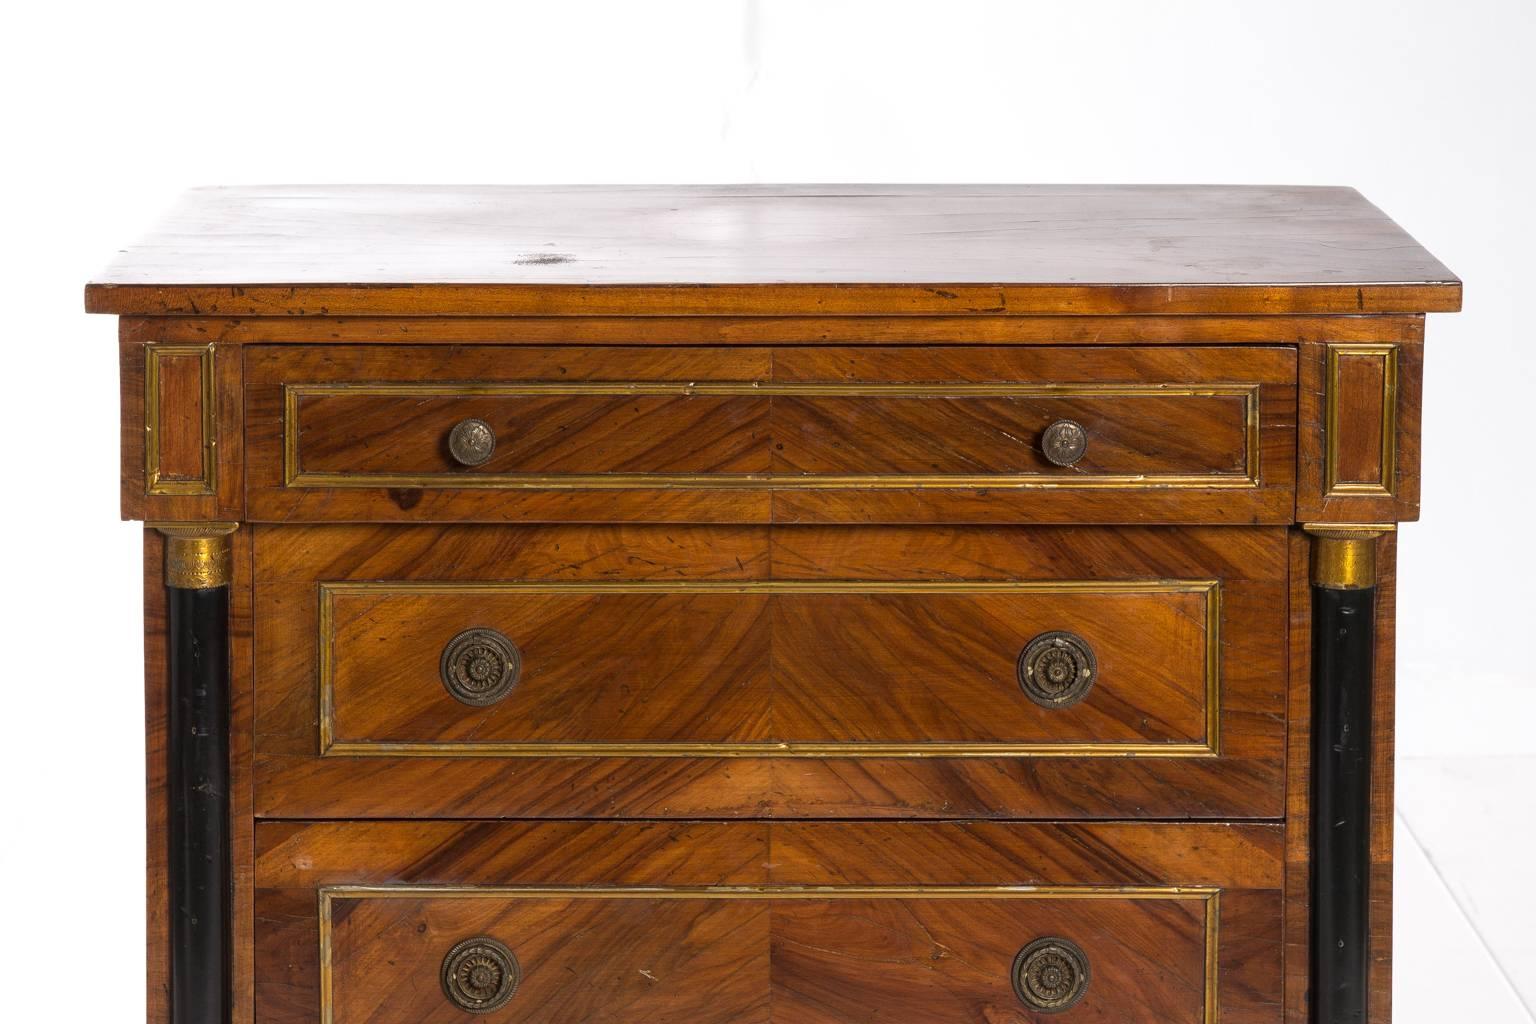 Biedermeier style three-drawer chest with engaged columns.
        